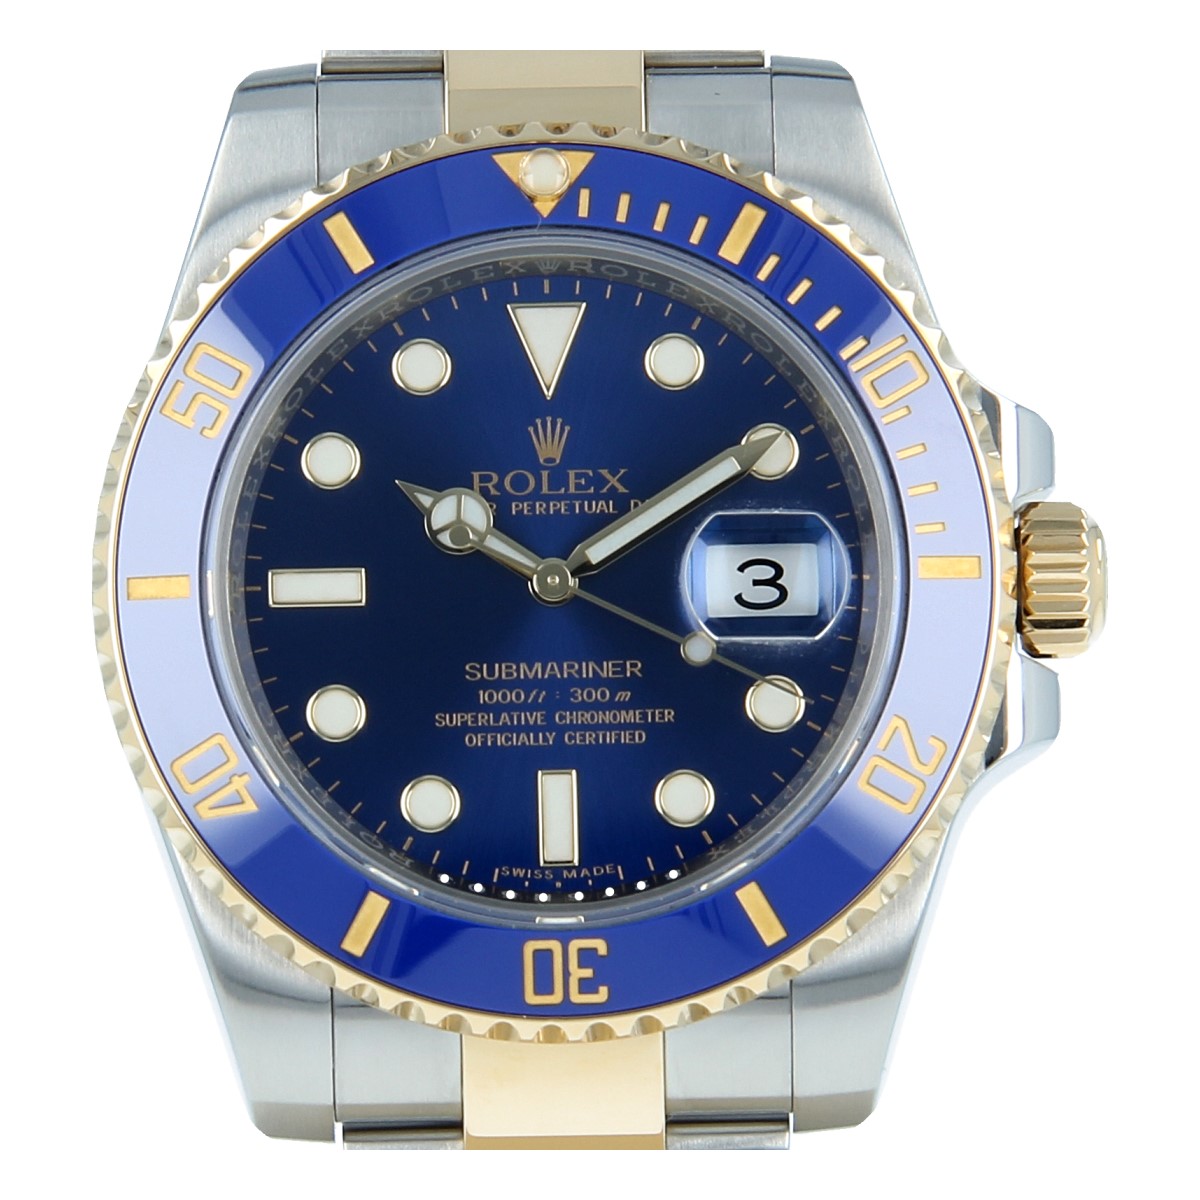 Rolex Submariner Date 116613LB | Buy pre-owned Rolex watch